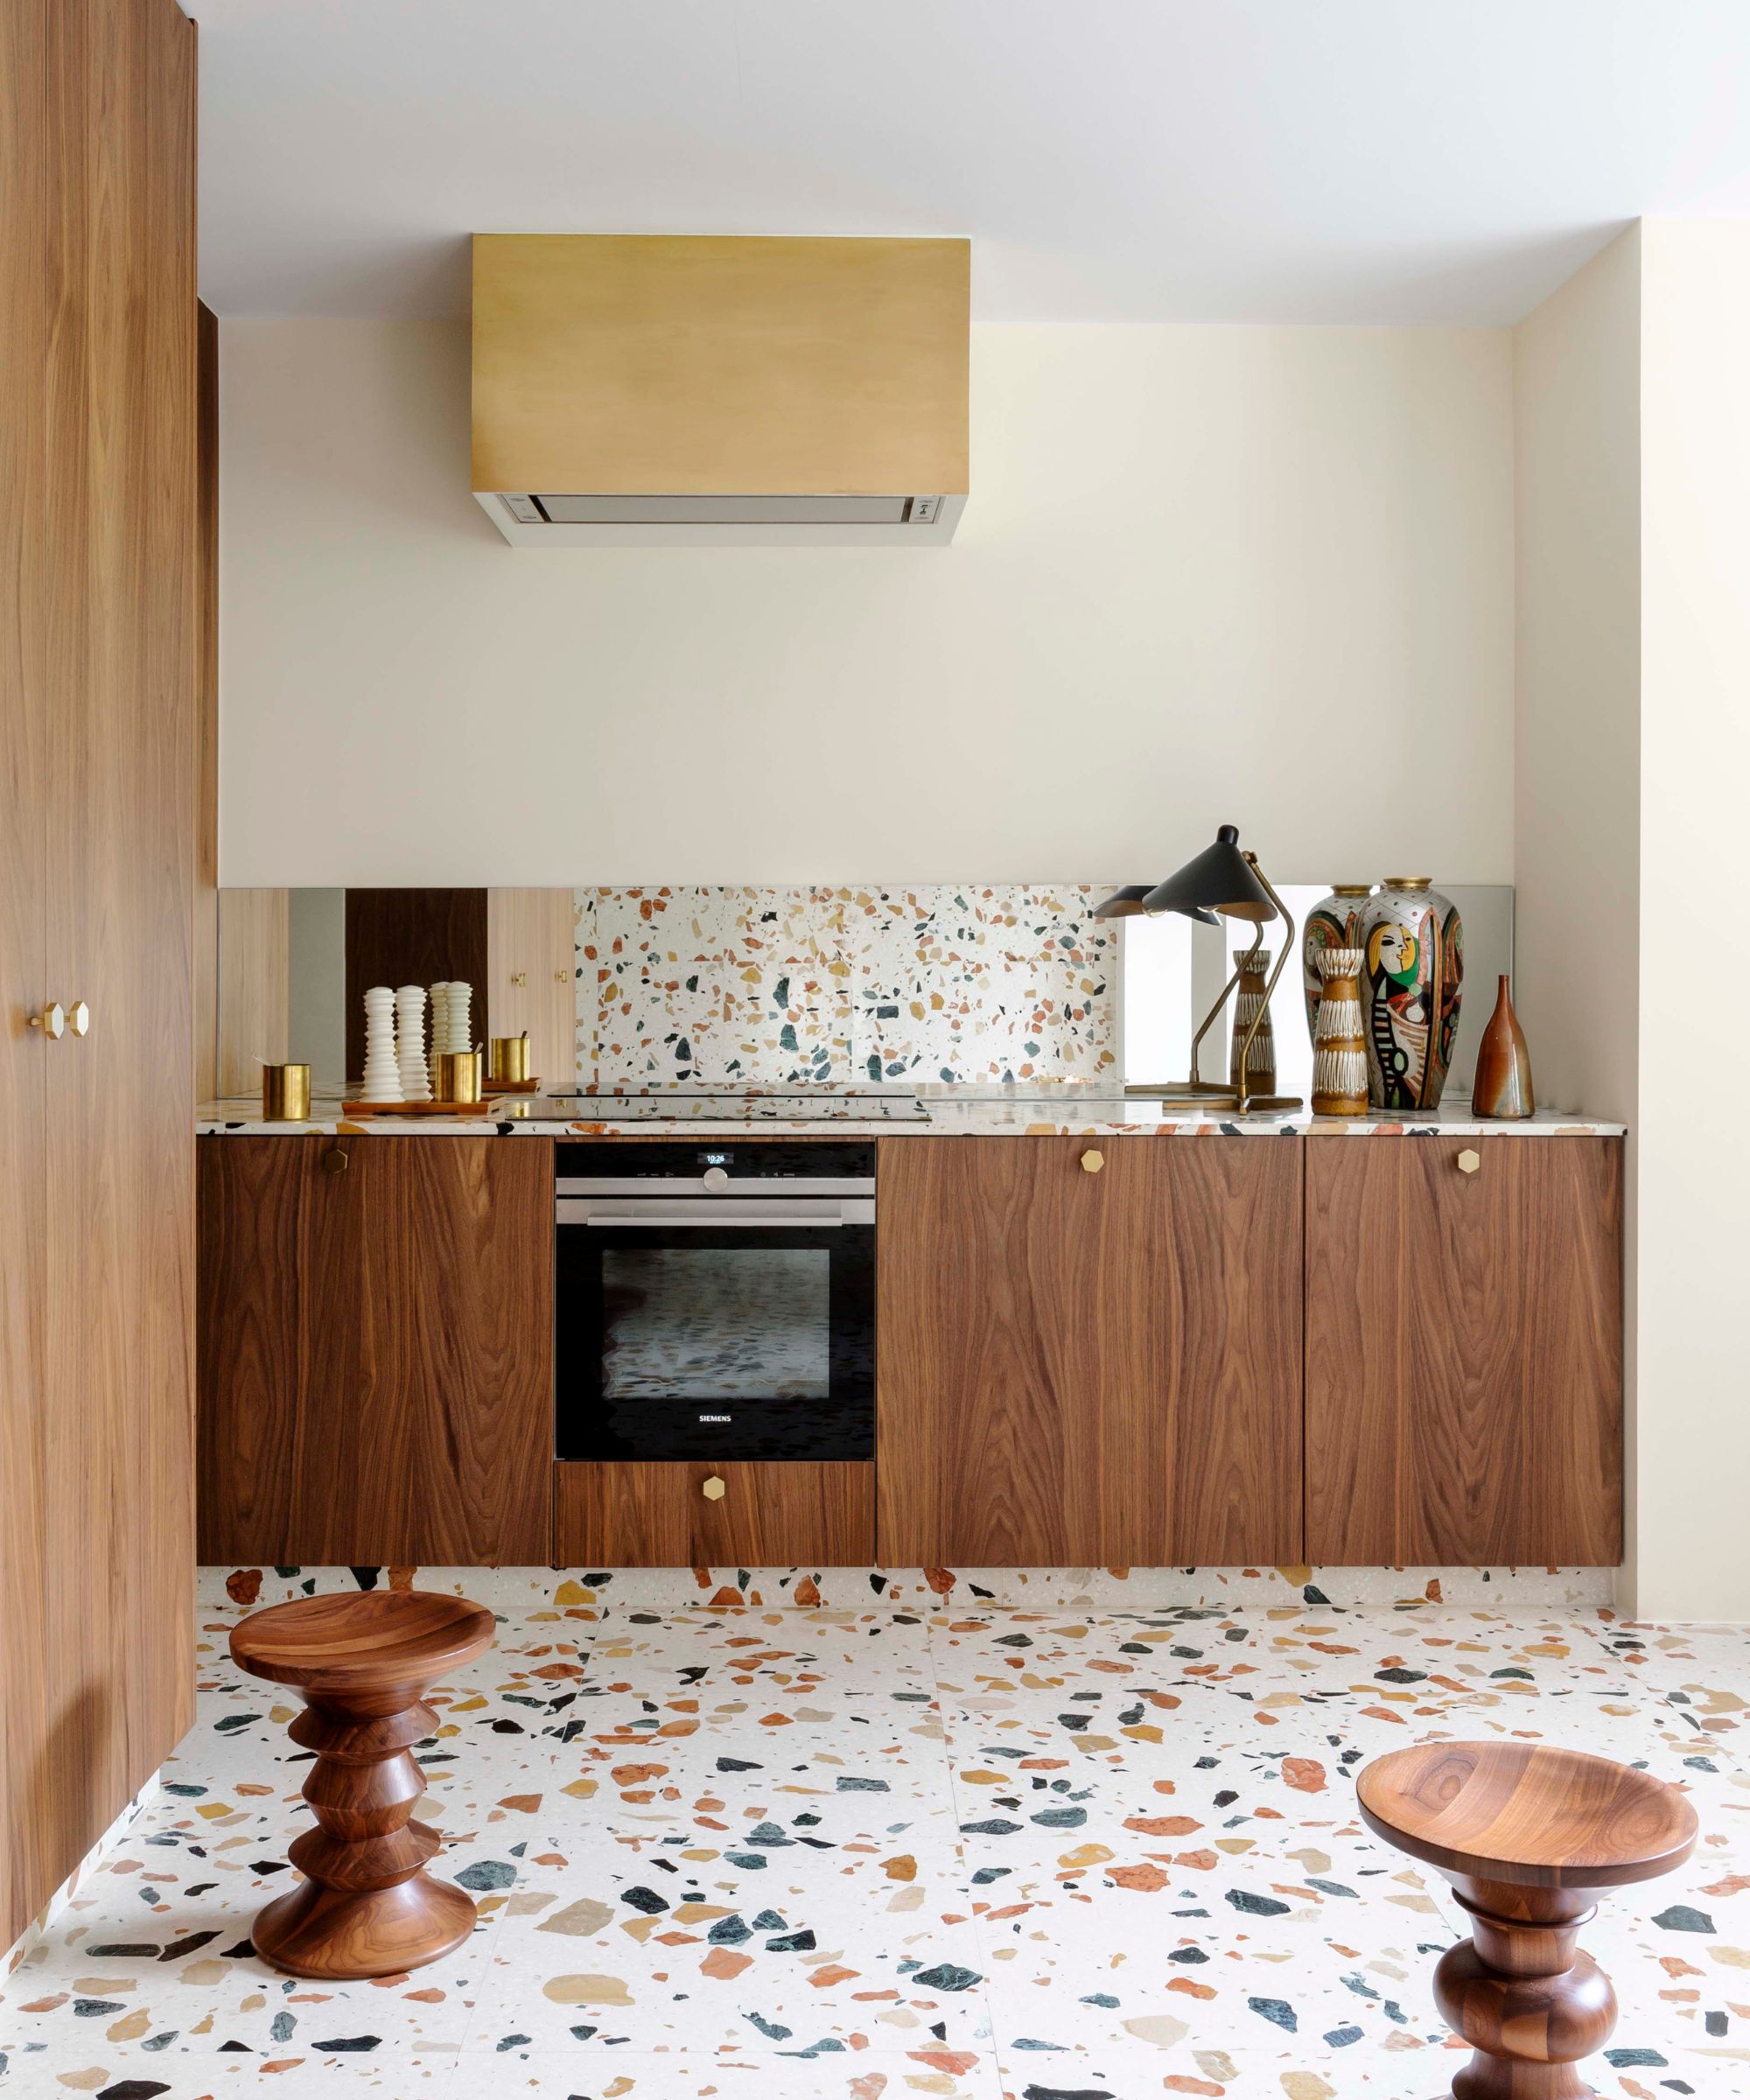 Retro kitchen by Victoria-Maria with walnut cabinets, terrazzo floor and brass cooker hood